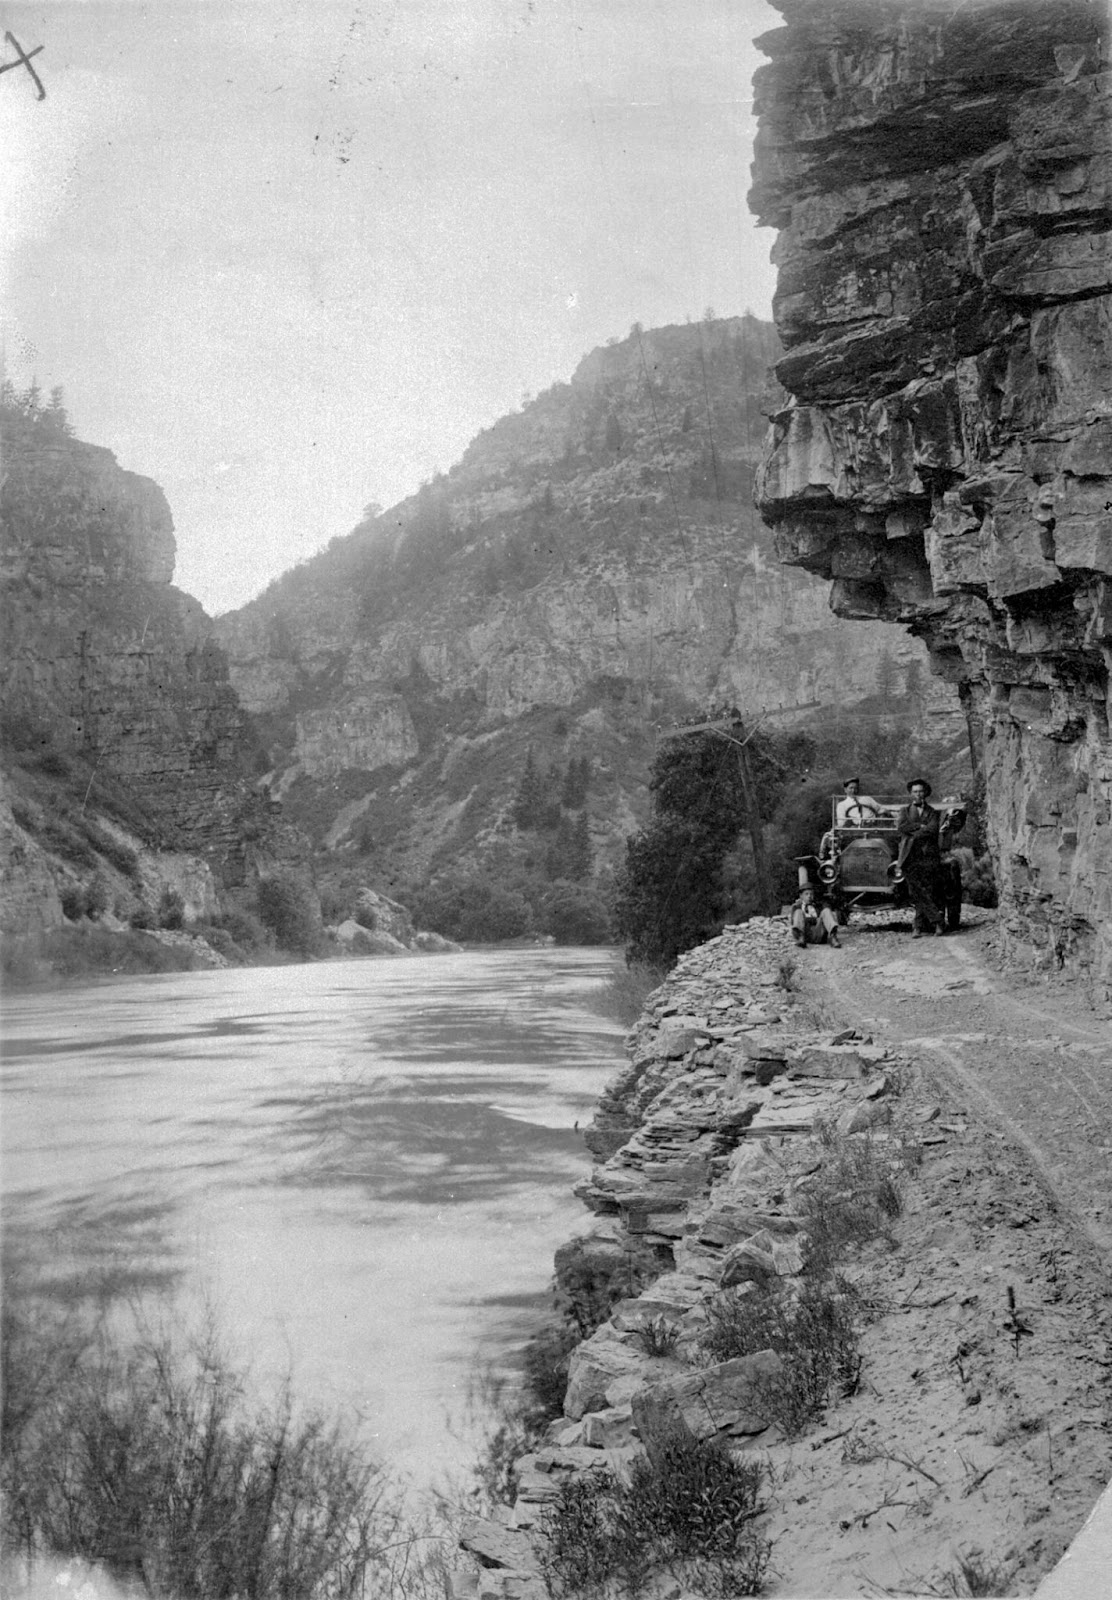 An early 20th-century car drives along a narrow road on the wall of a canyon. To one side of the car is a steep cliff, to the other side is a downward slope ending in water. Behind is a picturesque mountain.